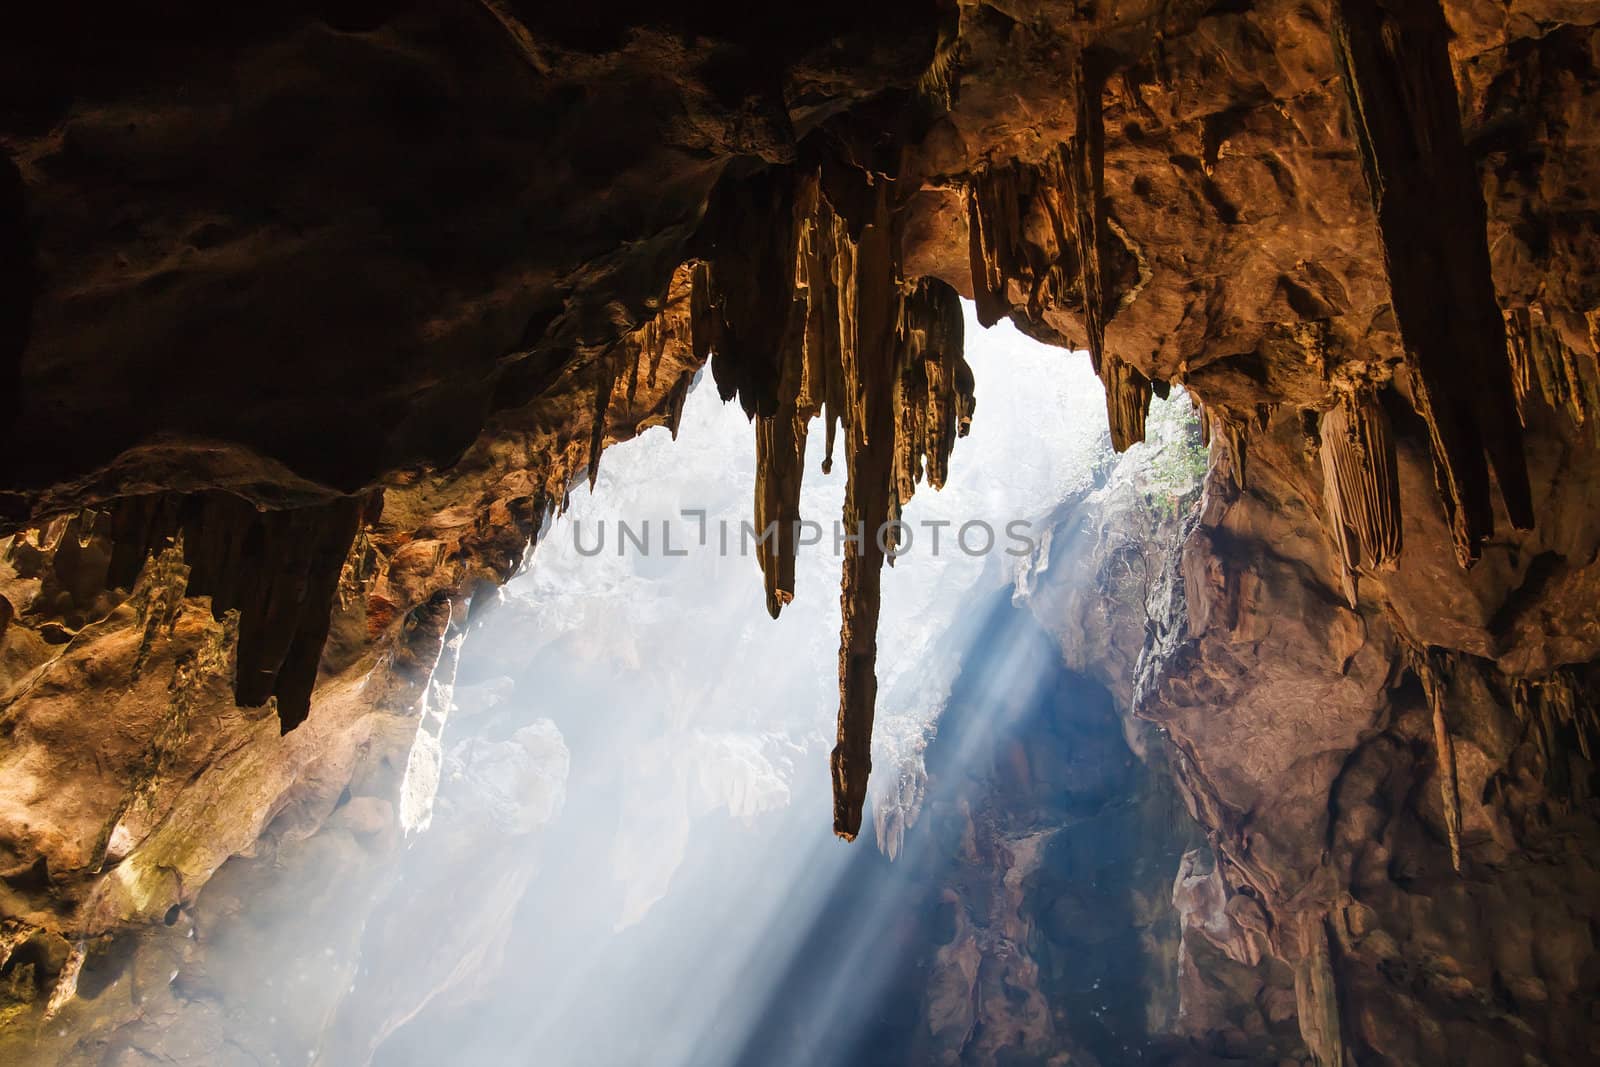 Sun Light in the cave  by jame_j@homail.com